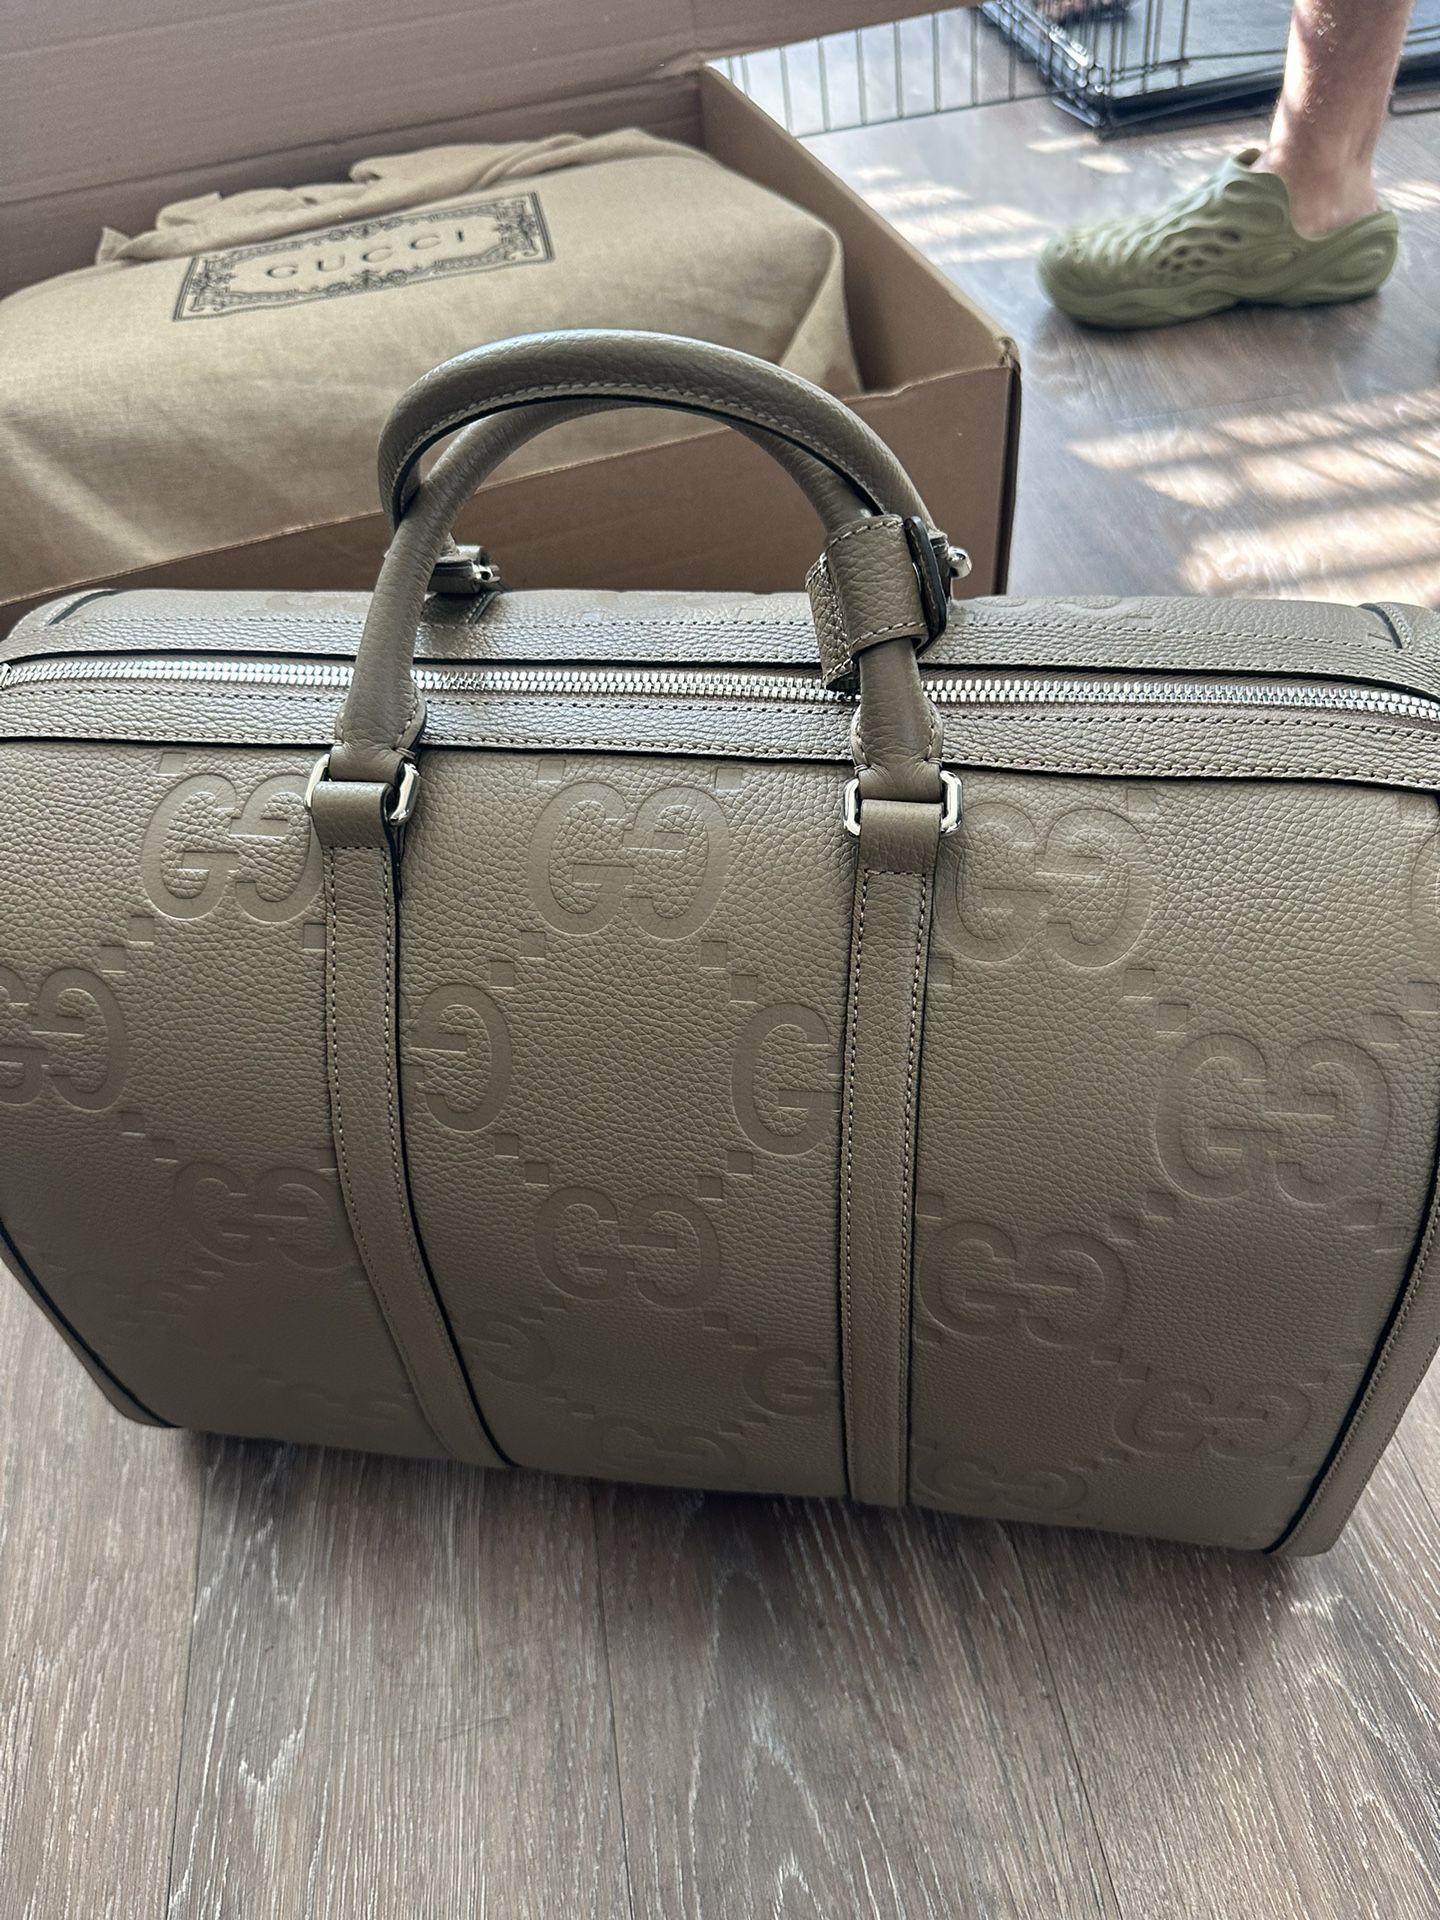 Gucci Duffle Bag (Authentic)